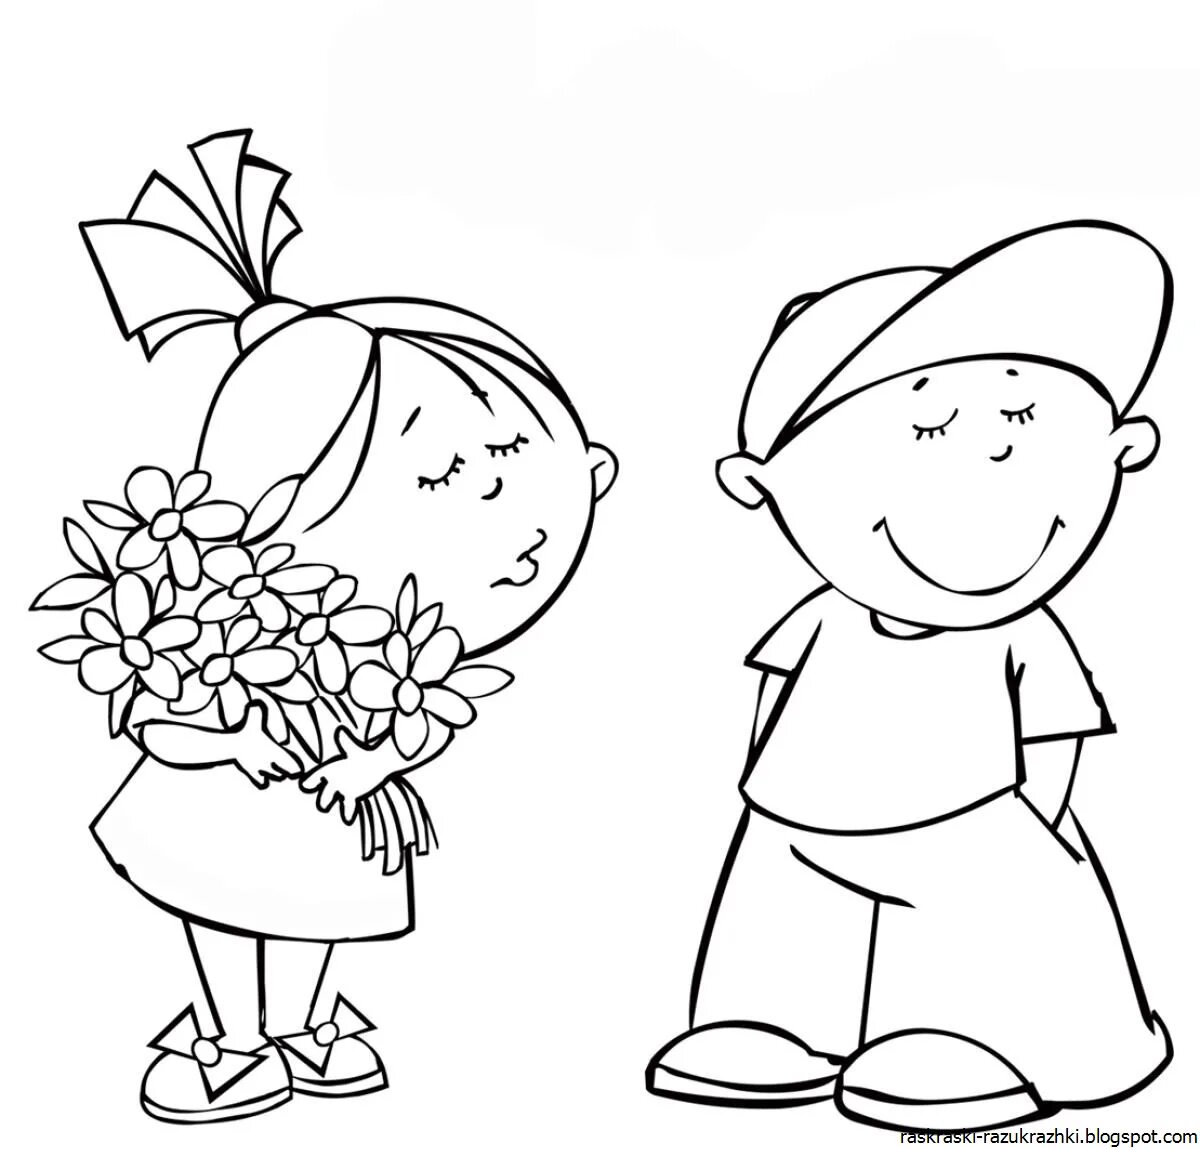 Boy and girl for kids #8